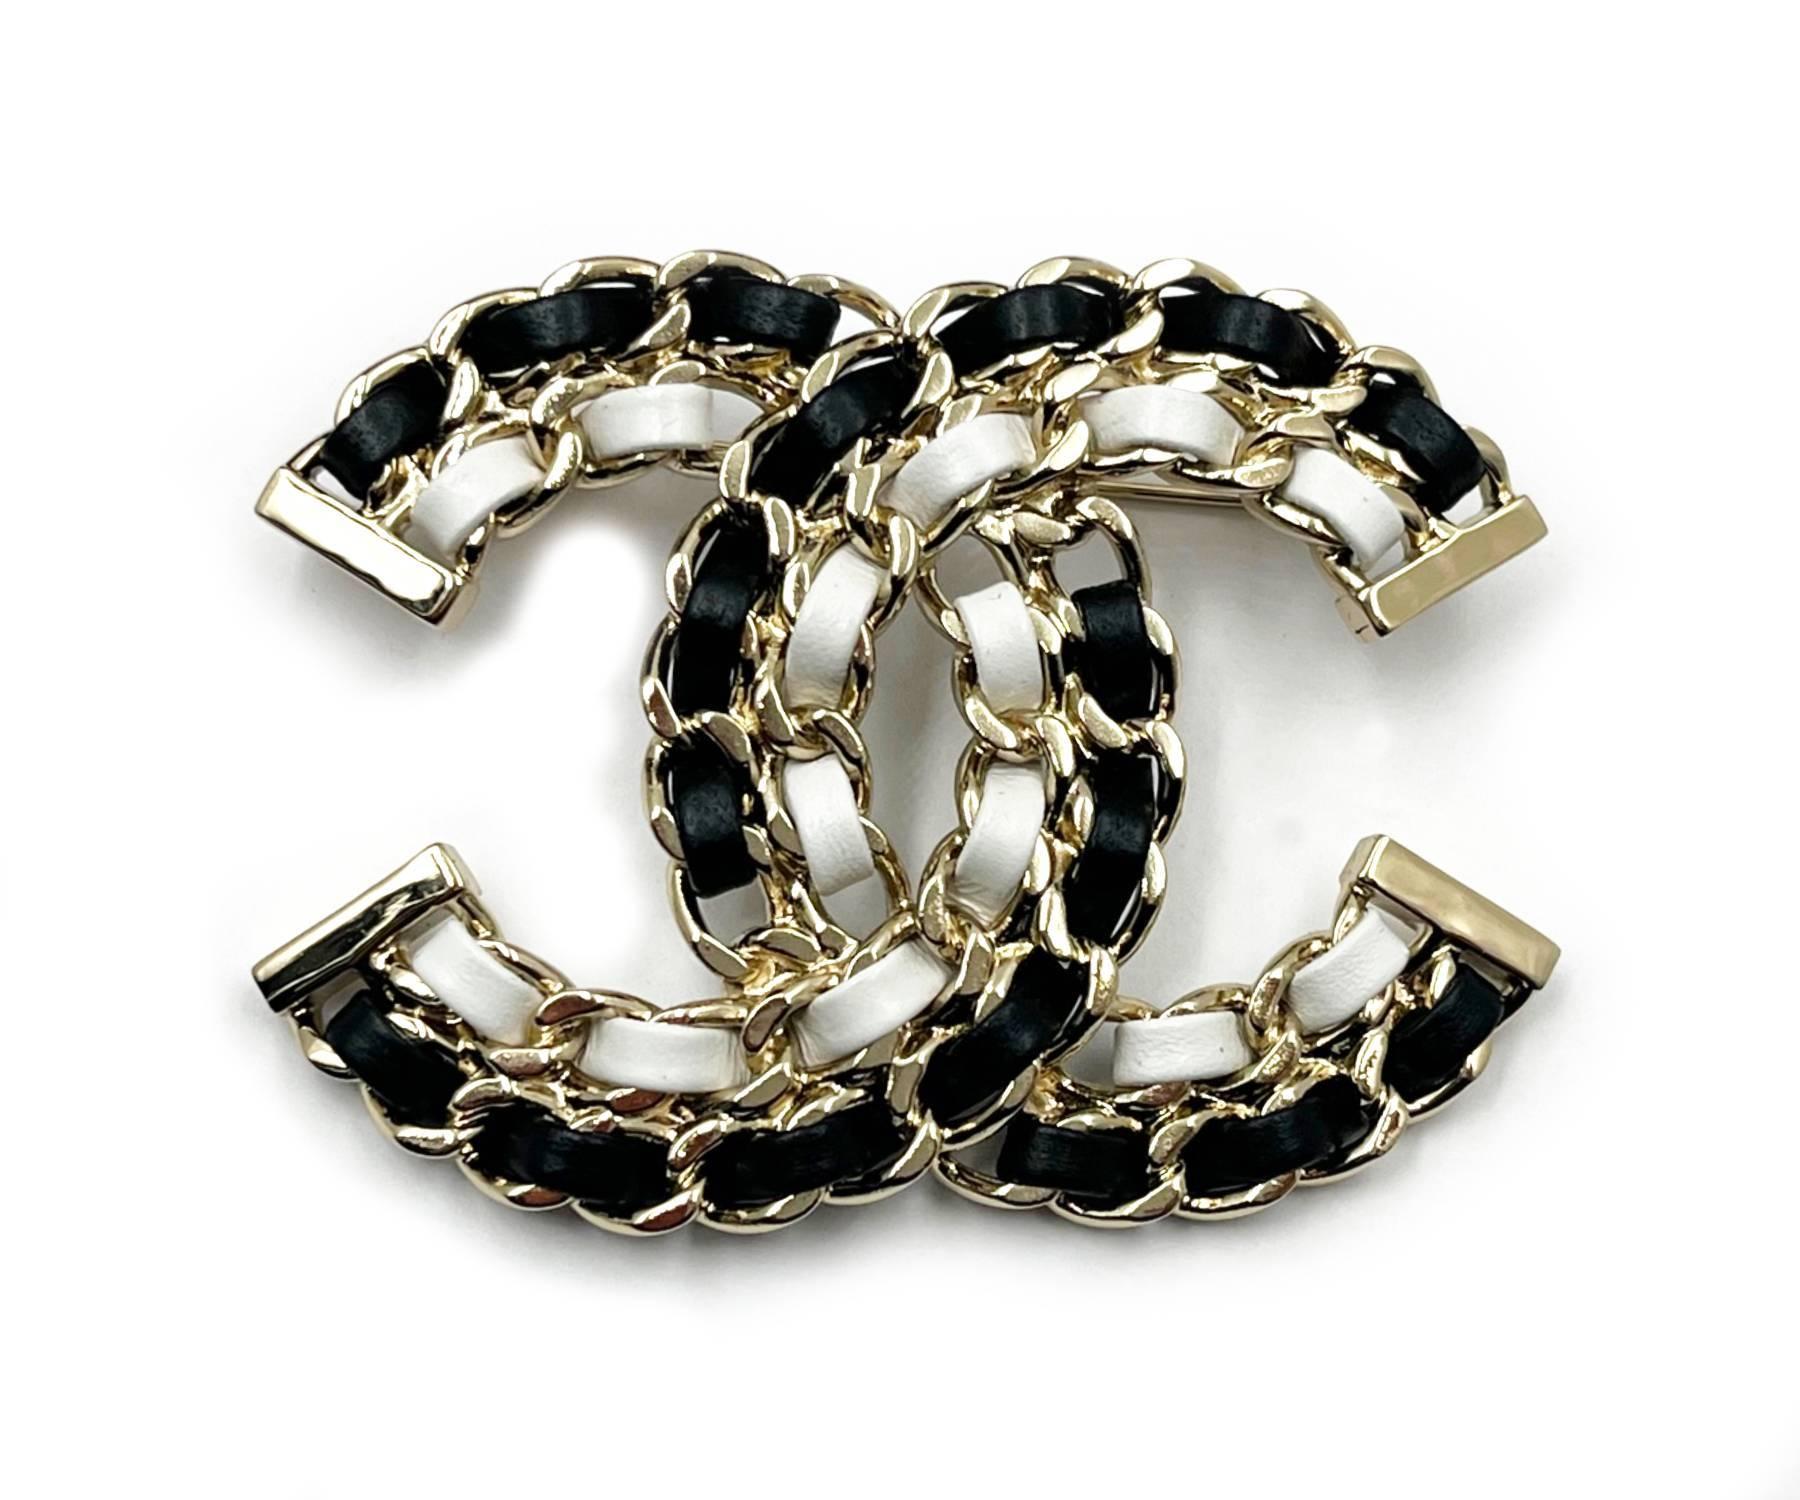 Chanel Brand New Gold CC Black White Leather Chain Large Brooch

*Marked 22
*Made in Italy
*Comes with the original box, pouch, booklet, camellia and ribbon
*Brand New

– It is approximately 2″ x 2.75″.

10260-8202